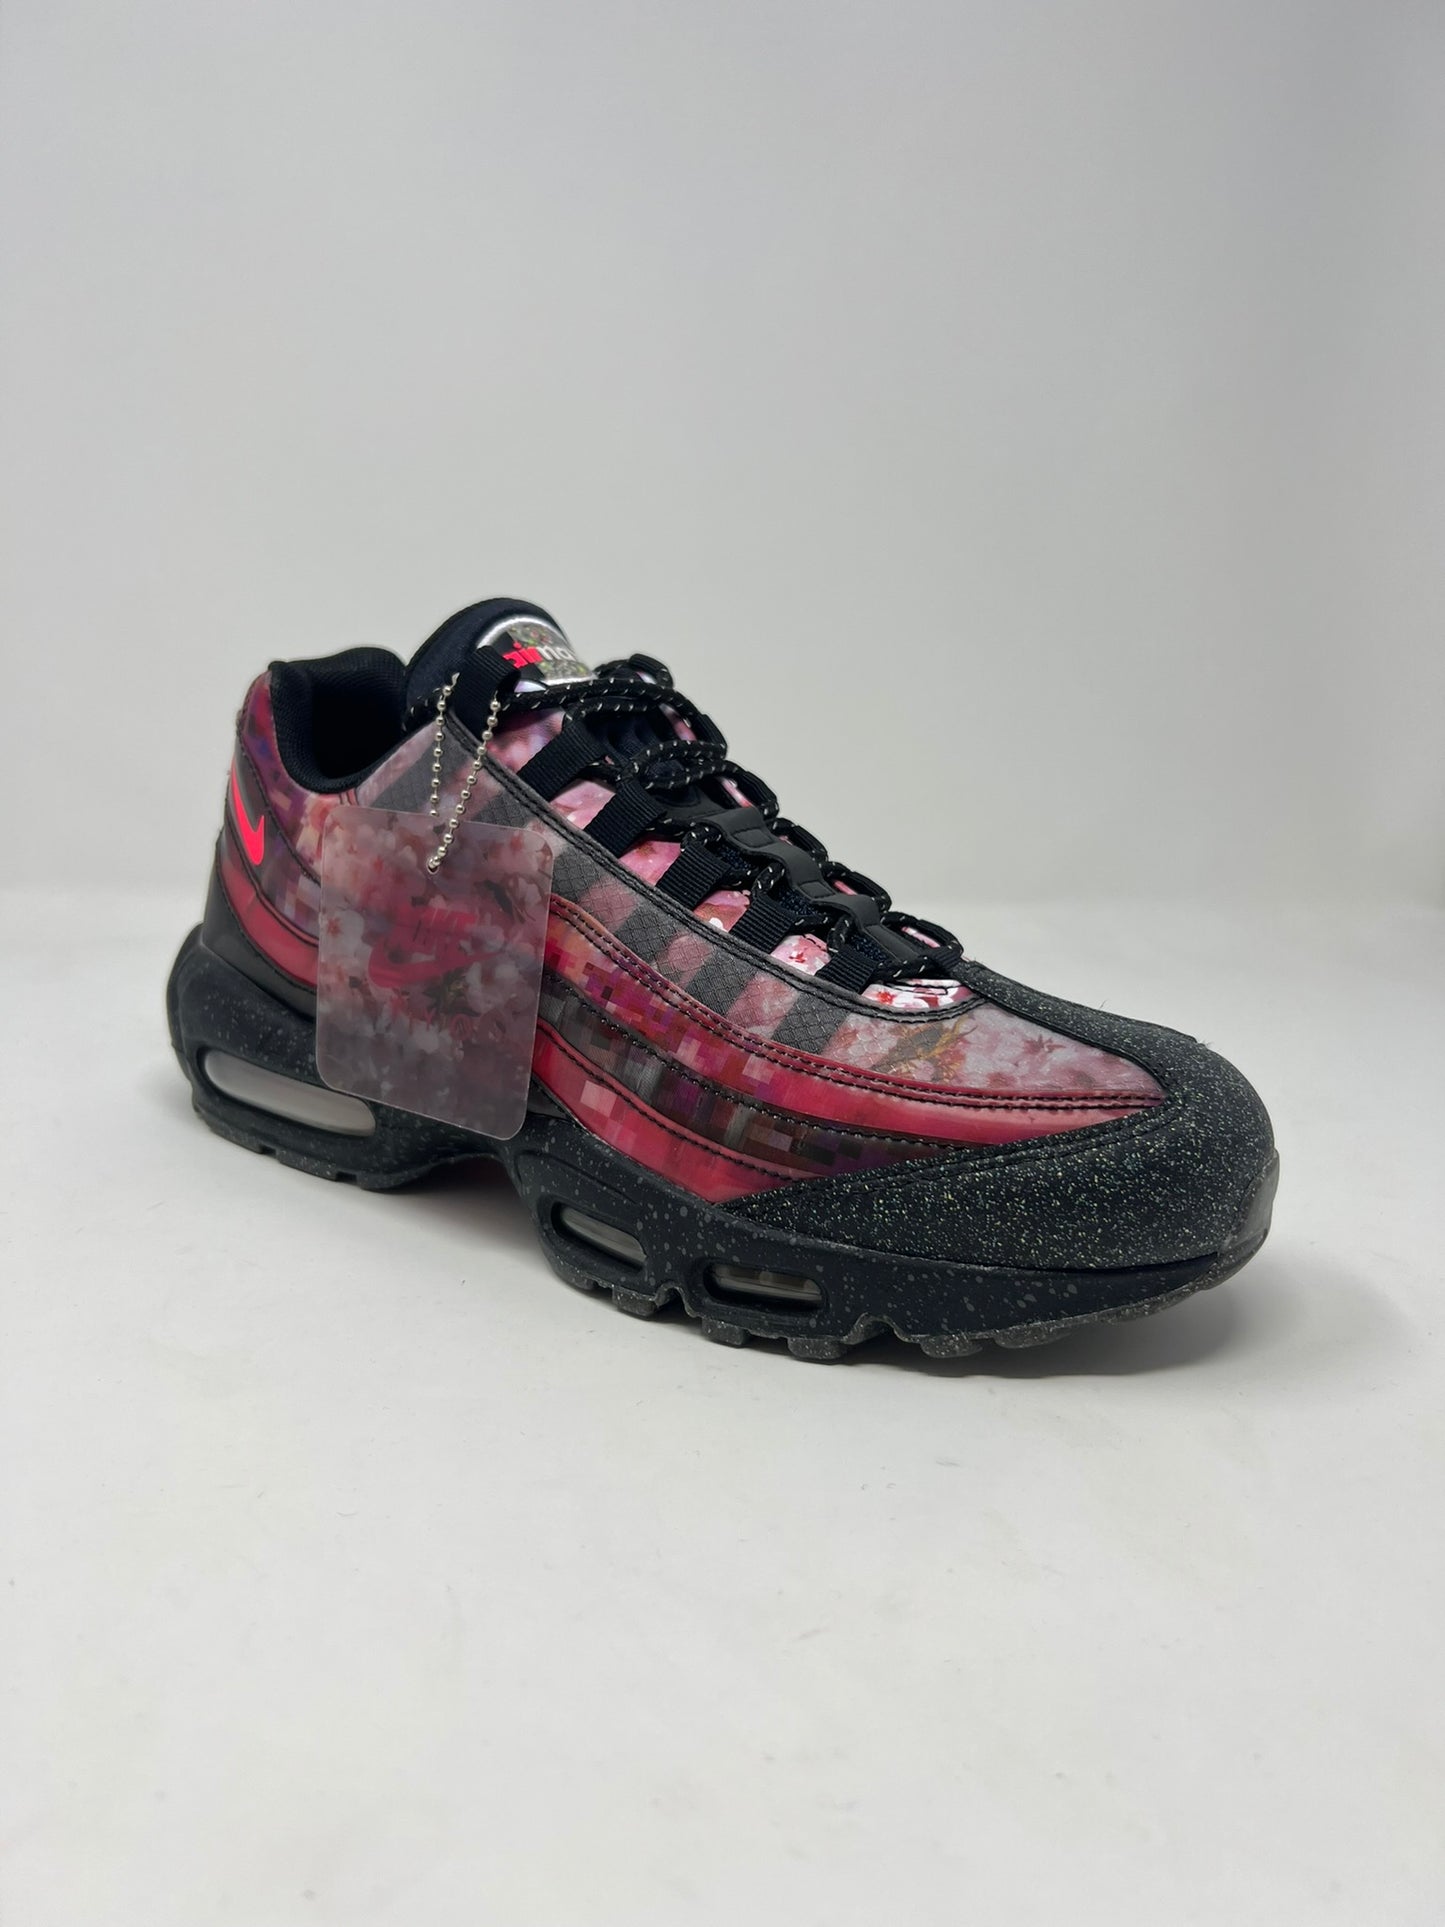 Nike Air Max 95 Cherry Blossom UK8.5 DS